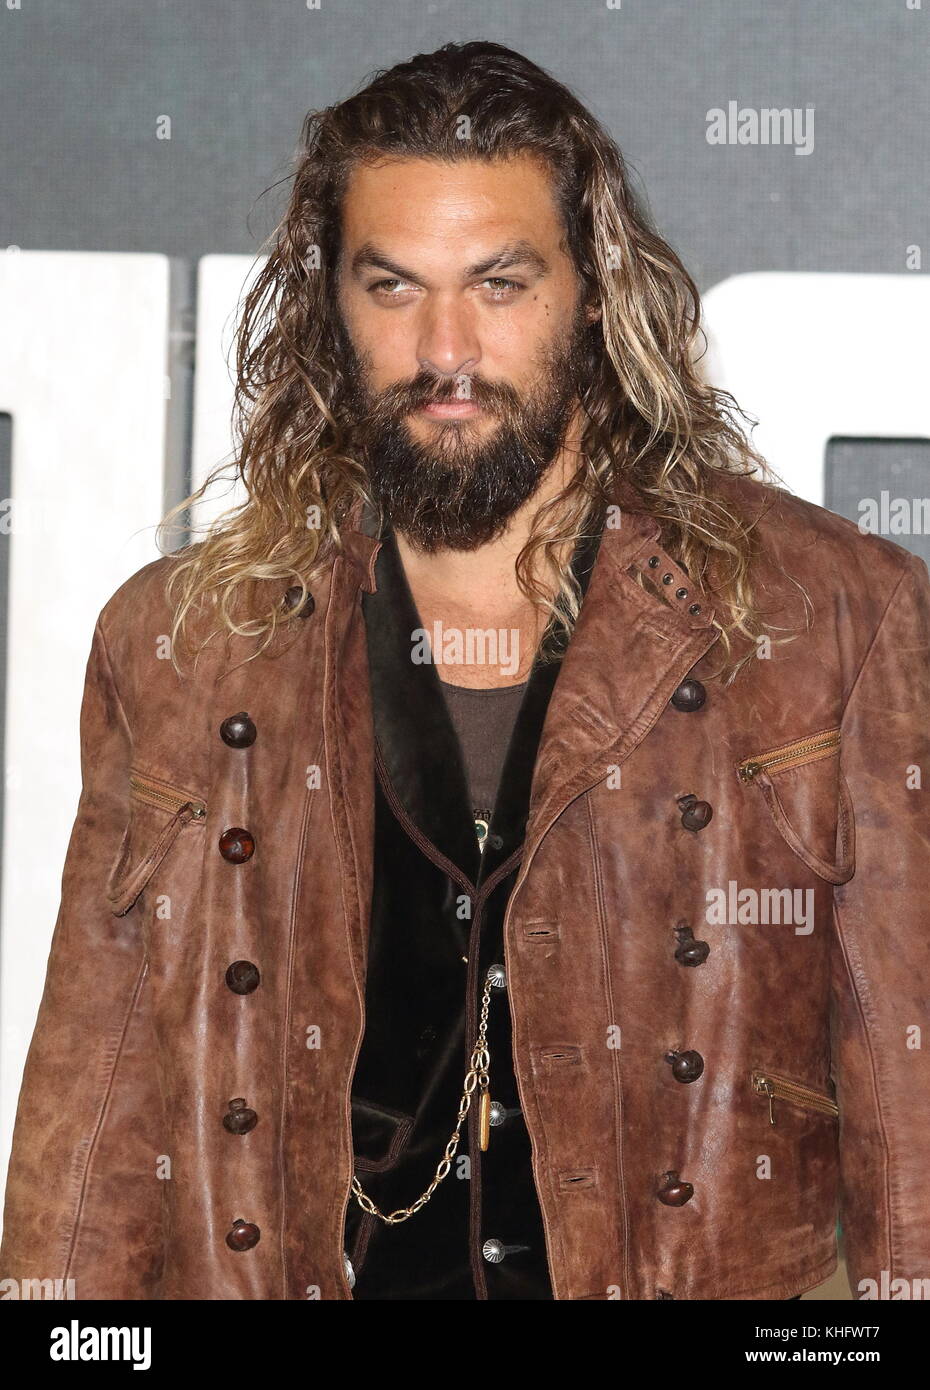 London, UK. Jason Momoa at the Justice League Photocall at The College ...